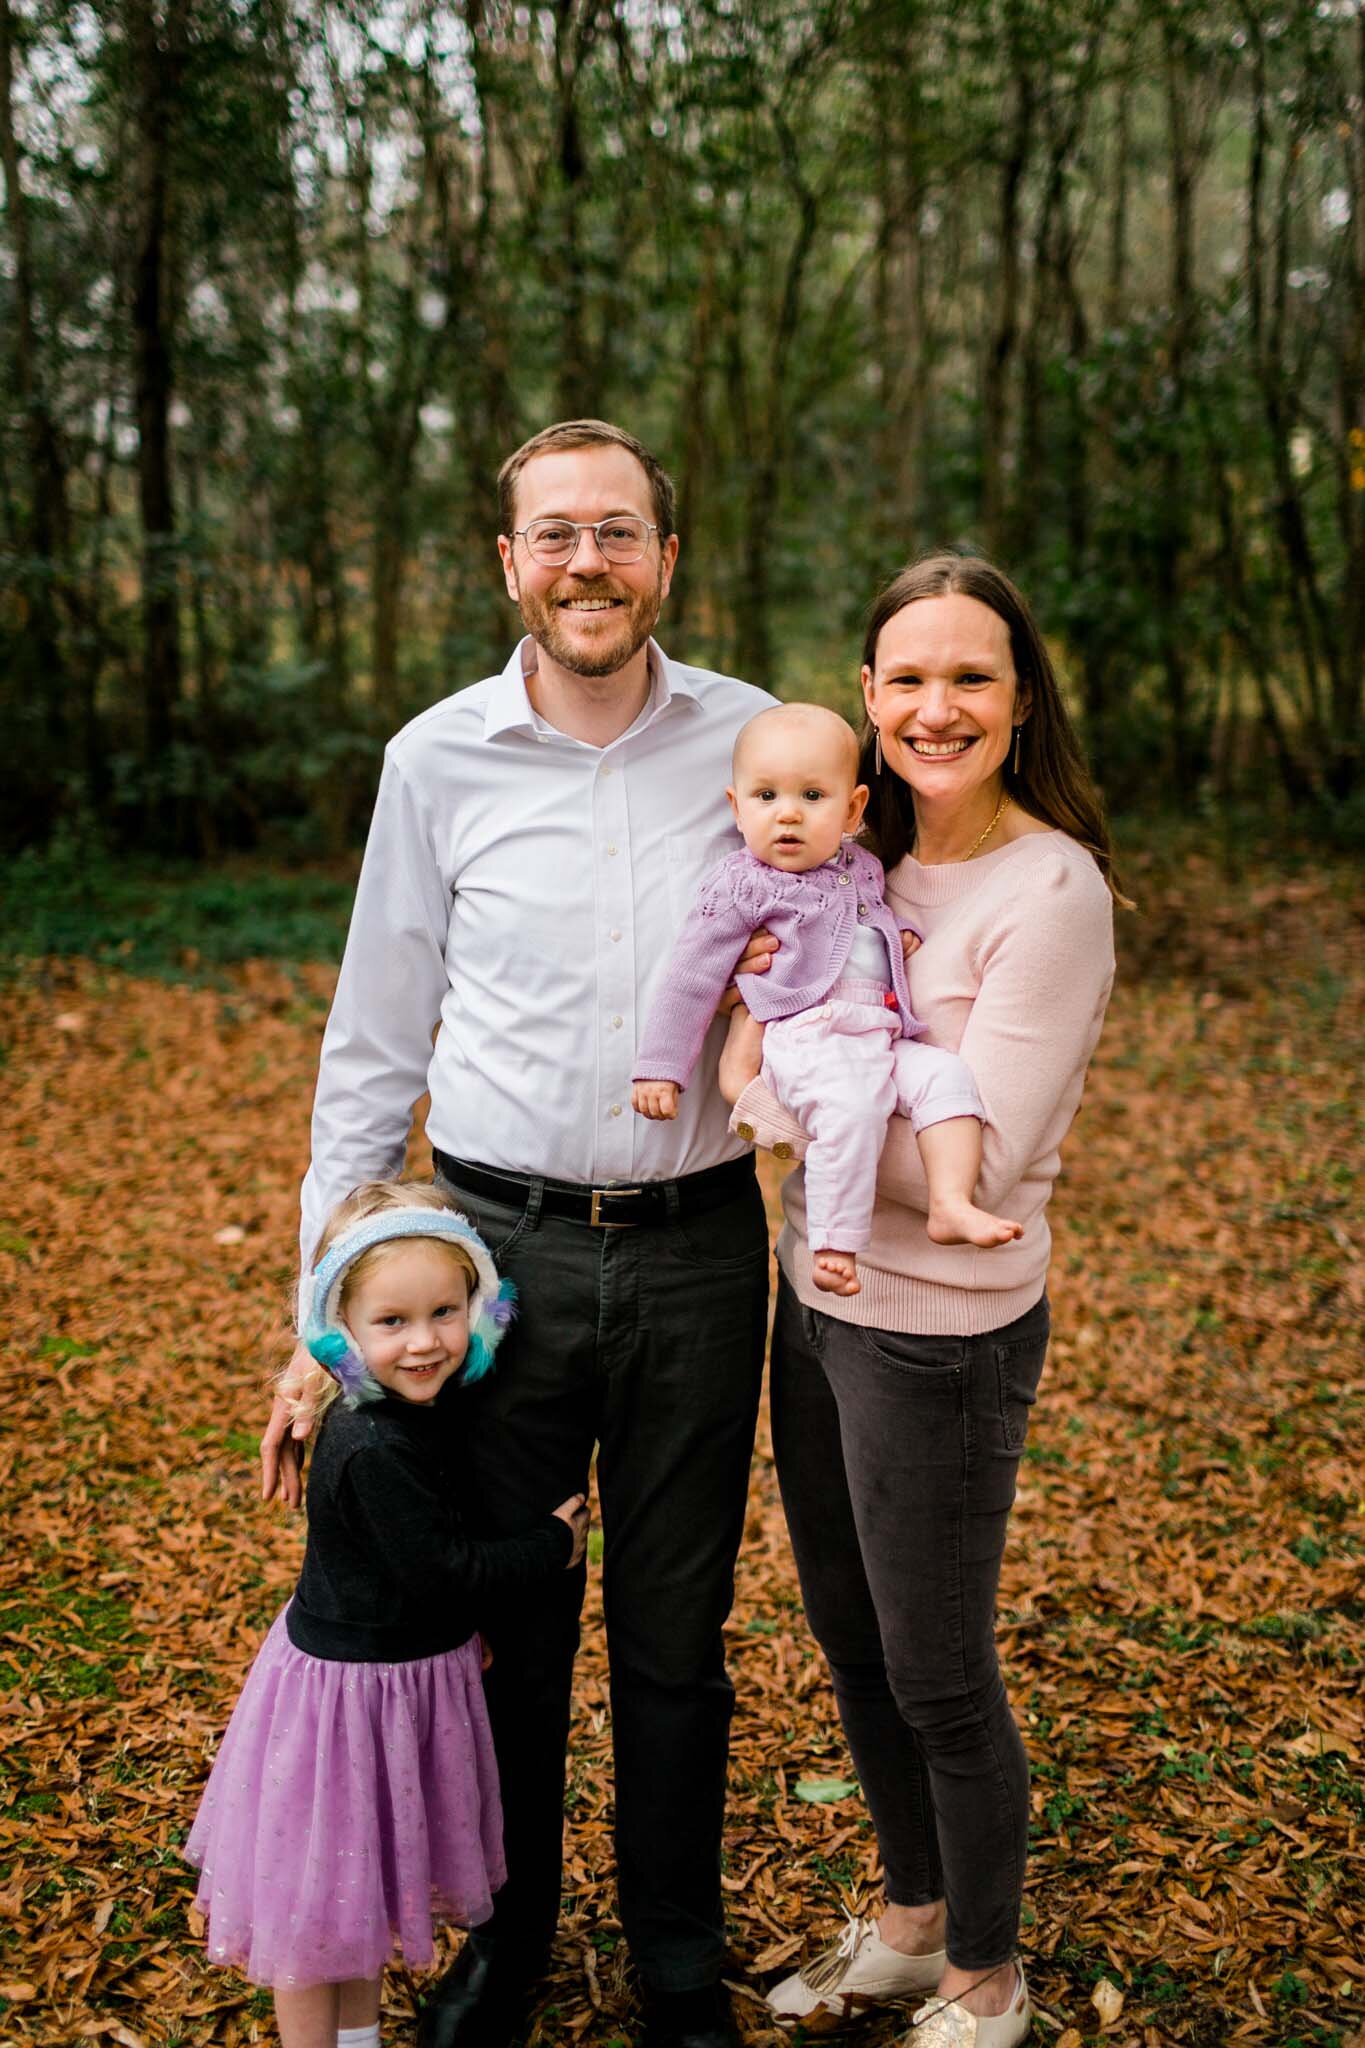 Durham Family Photographer | By G. Lin Photography | Candid outdoor family portrait